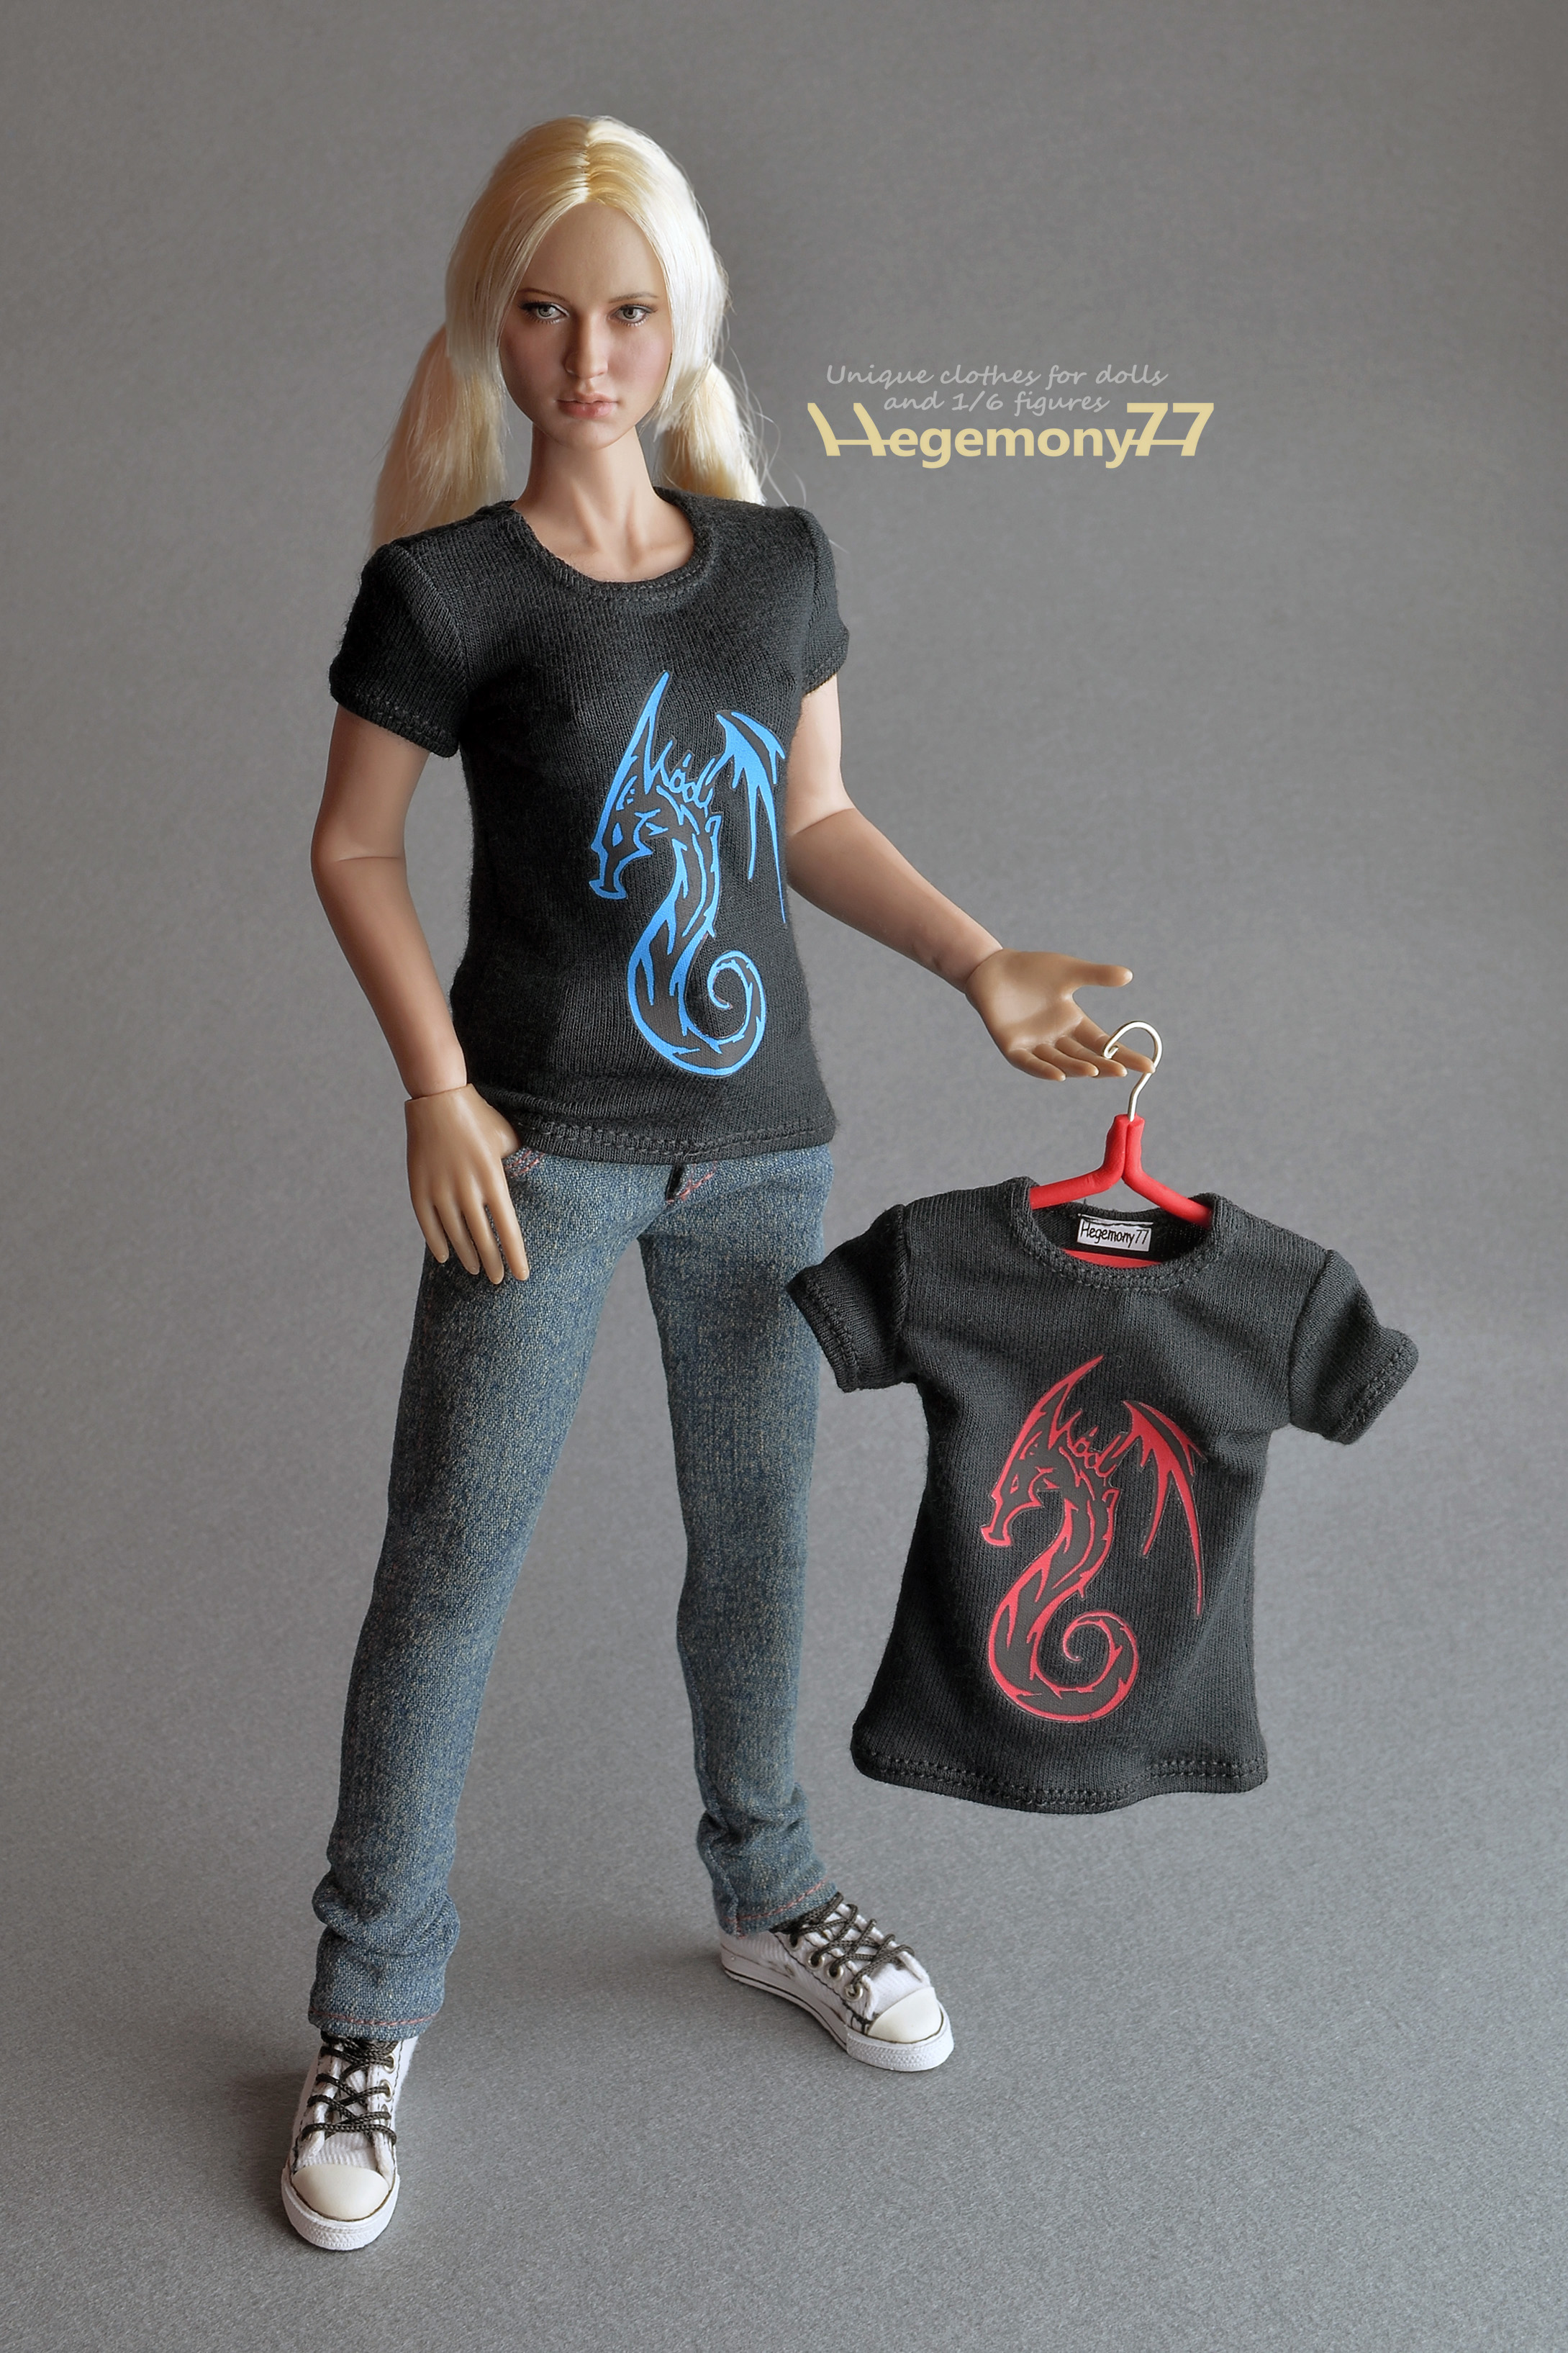 Sixth scale Phicen female figure custom clothes by Hegemony77 on DeviantArt